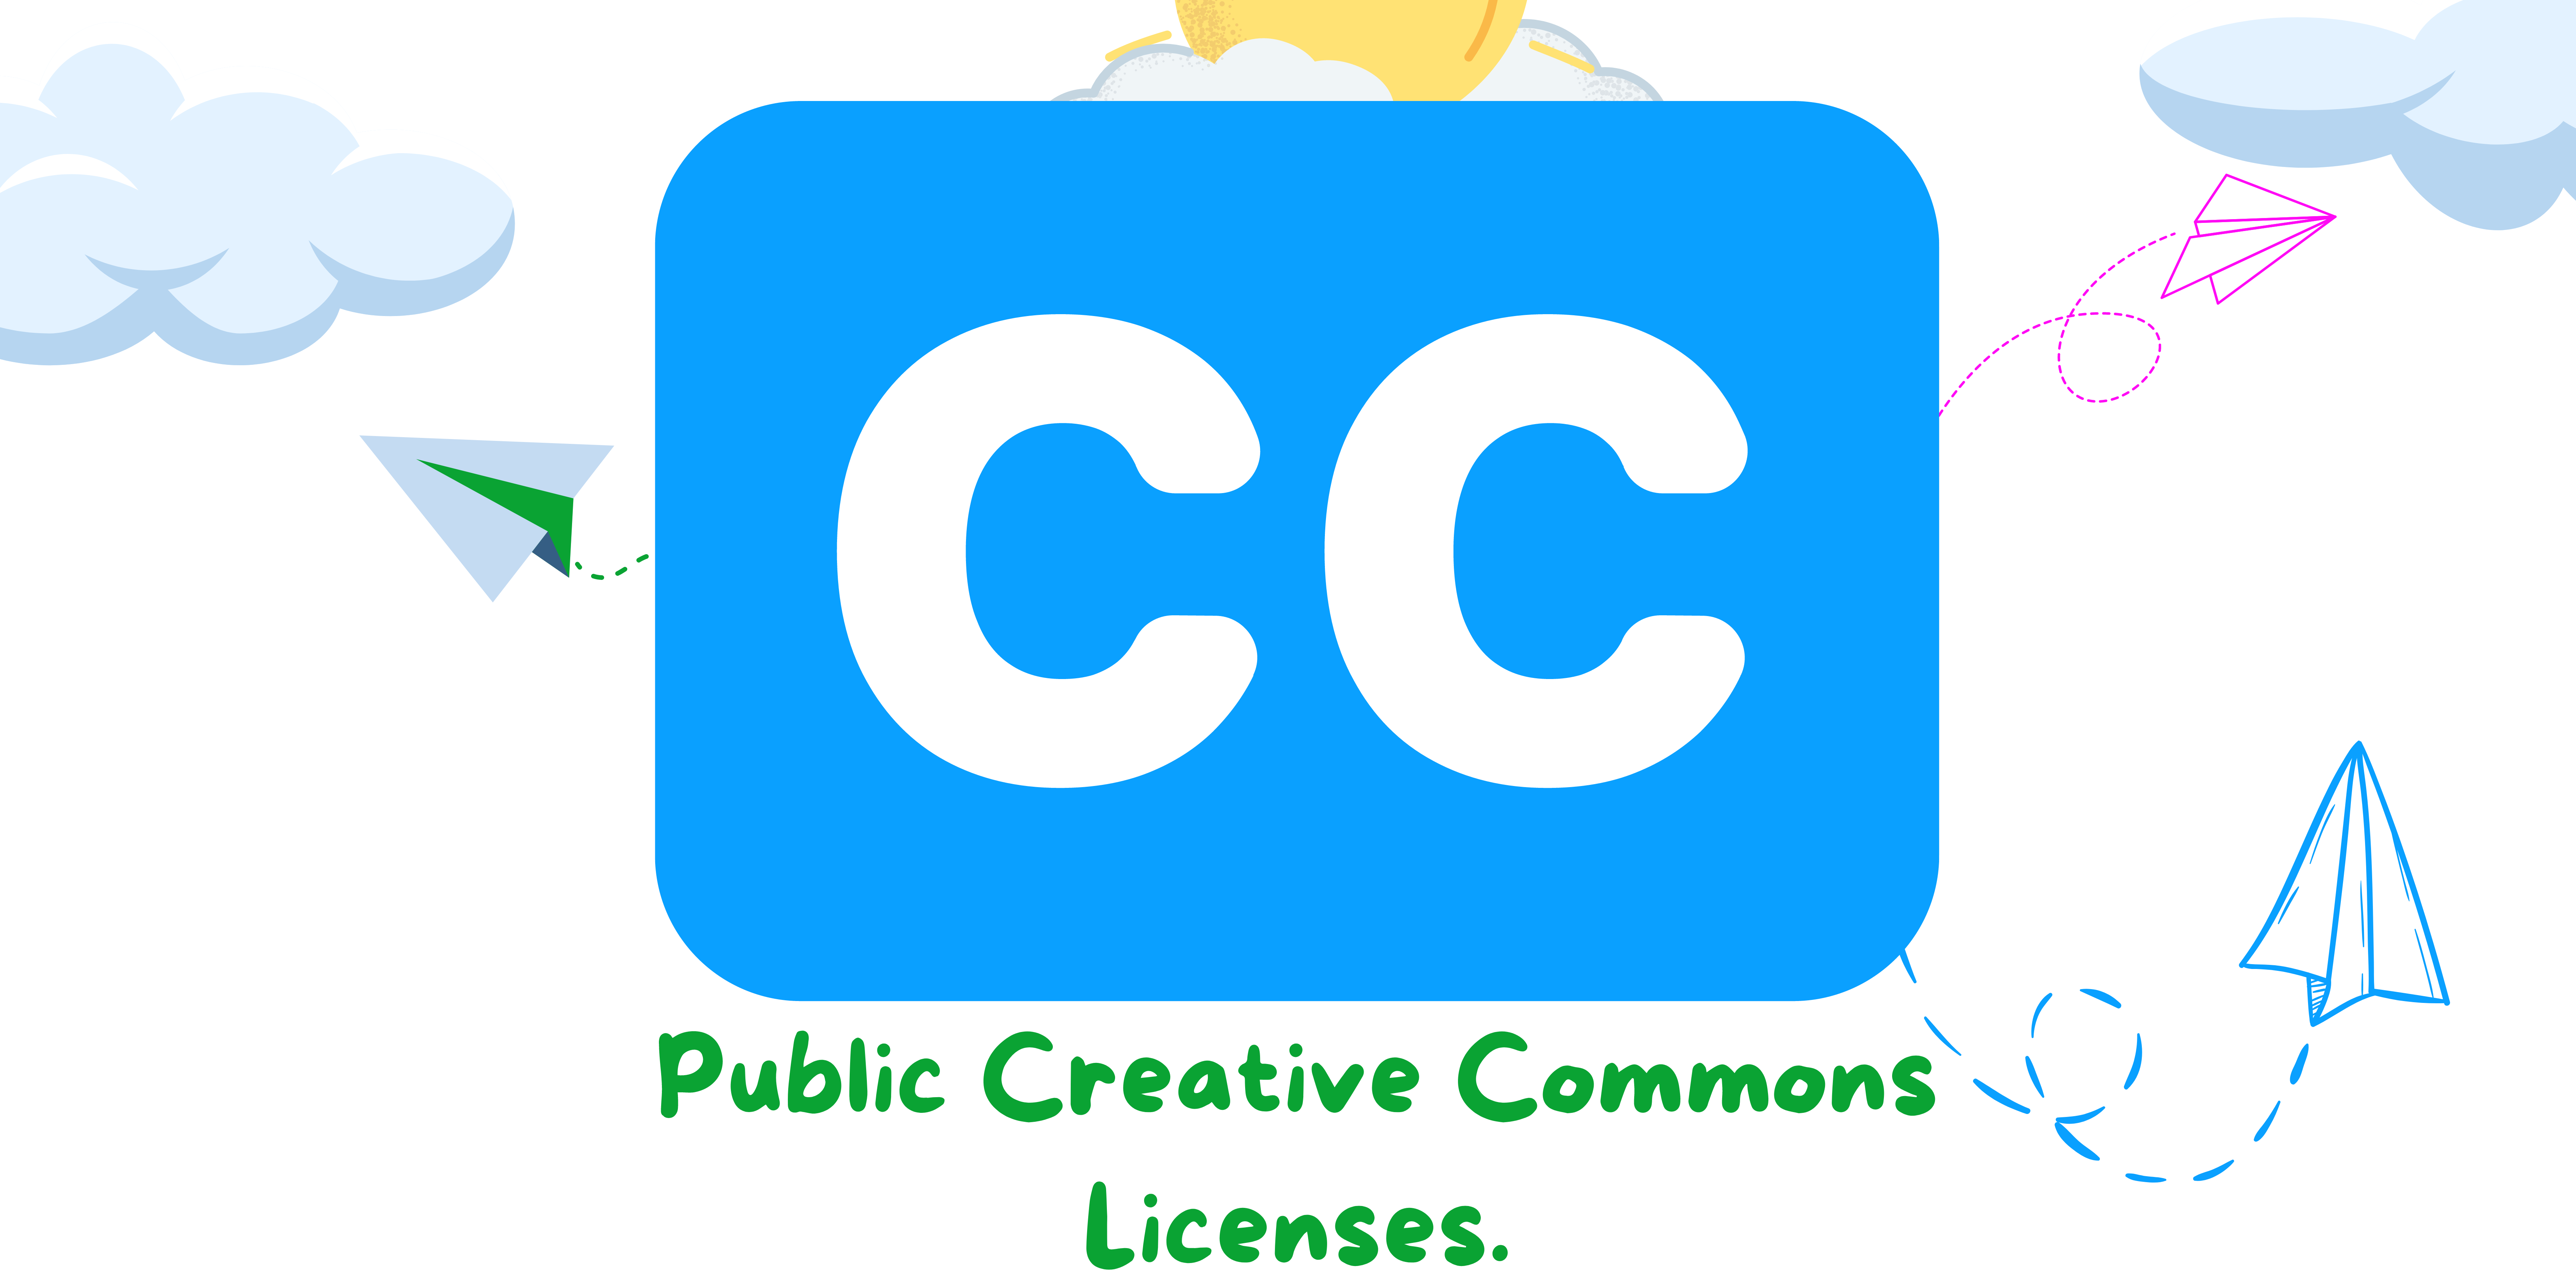 What are Public Creative Commons (.CC), and how can it benefit your business & profitability?